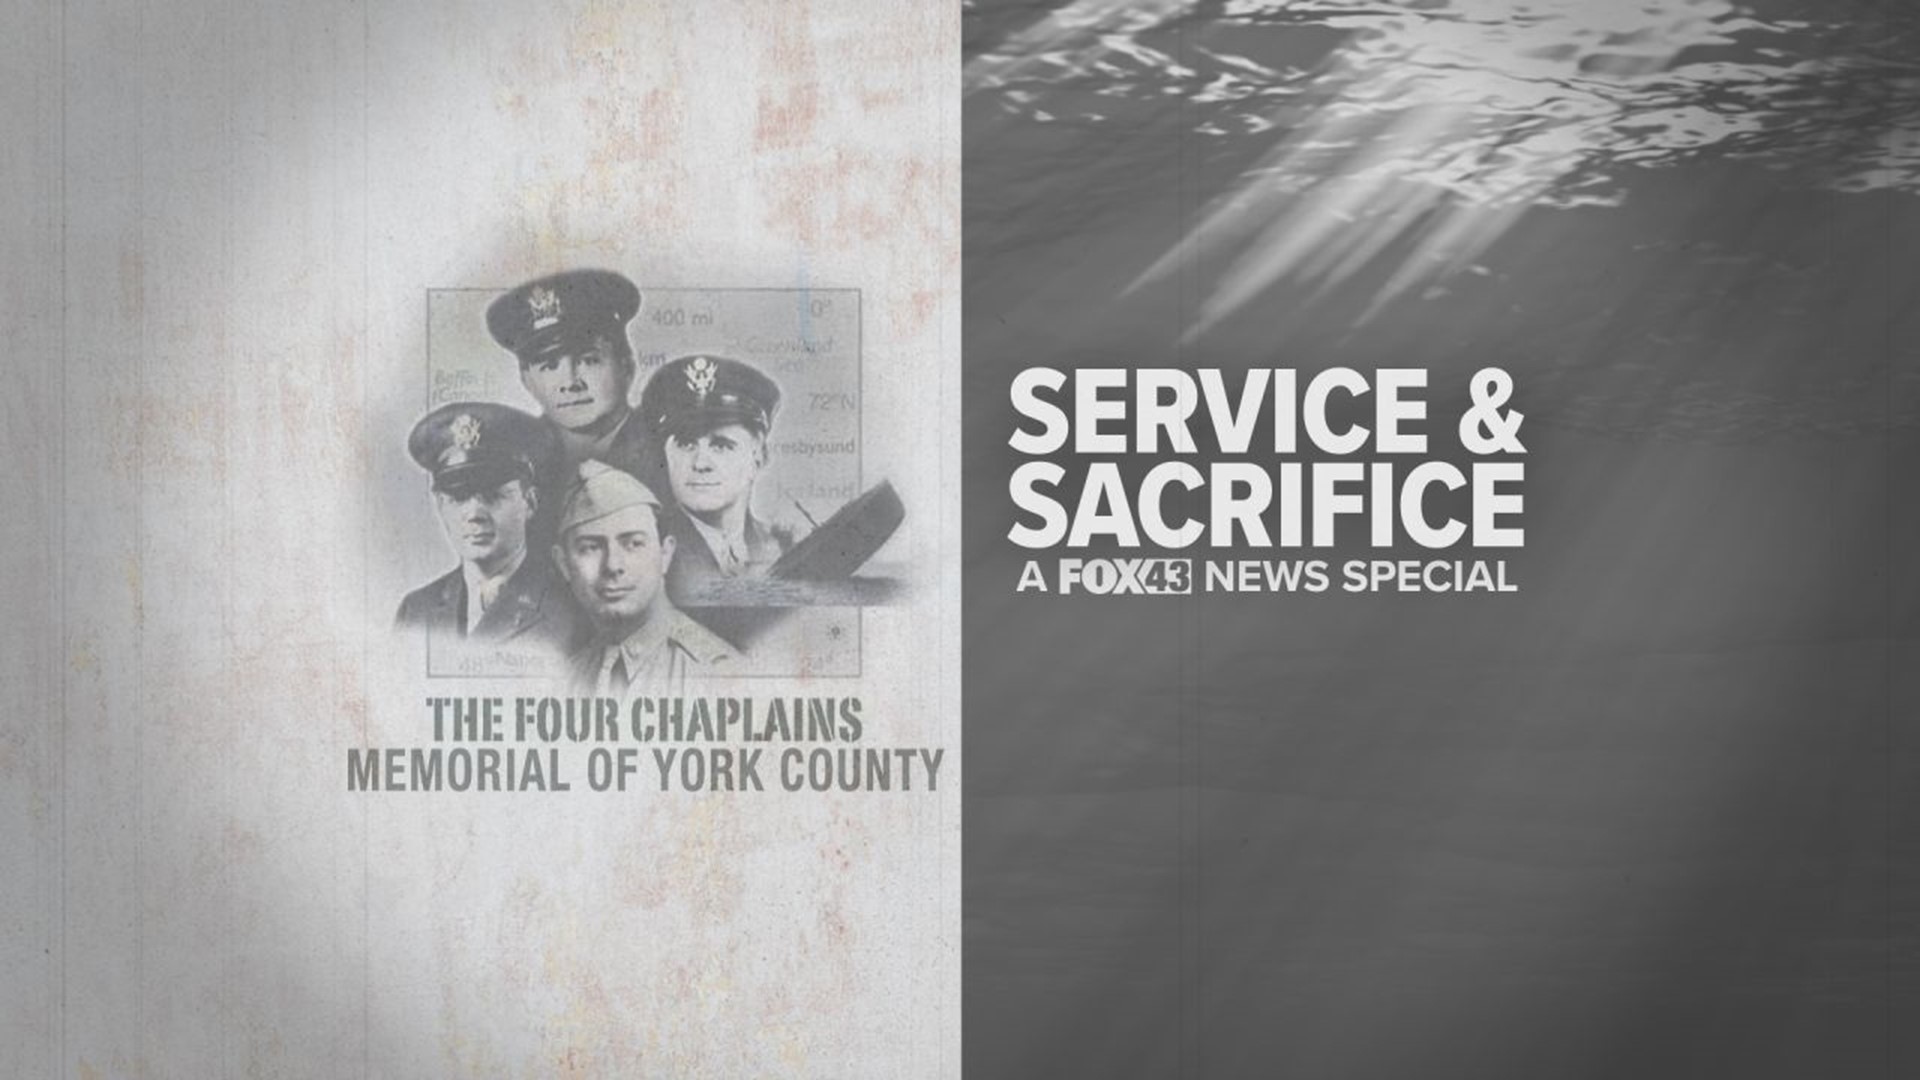 This program discusses the immortal Four Chaplains who perished on the USAT Dorchester during World War II. Evan Forrester explains the history of the Chaplains.